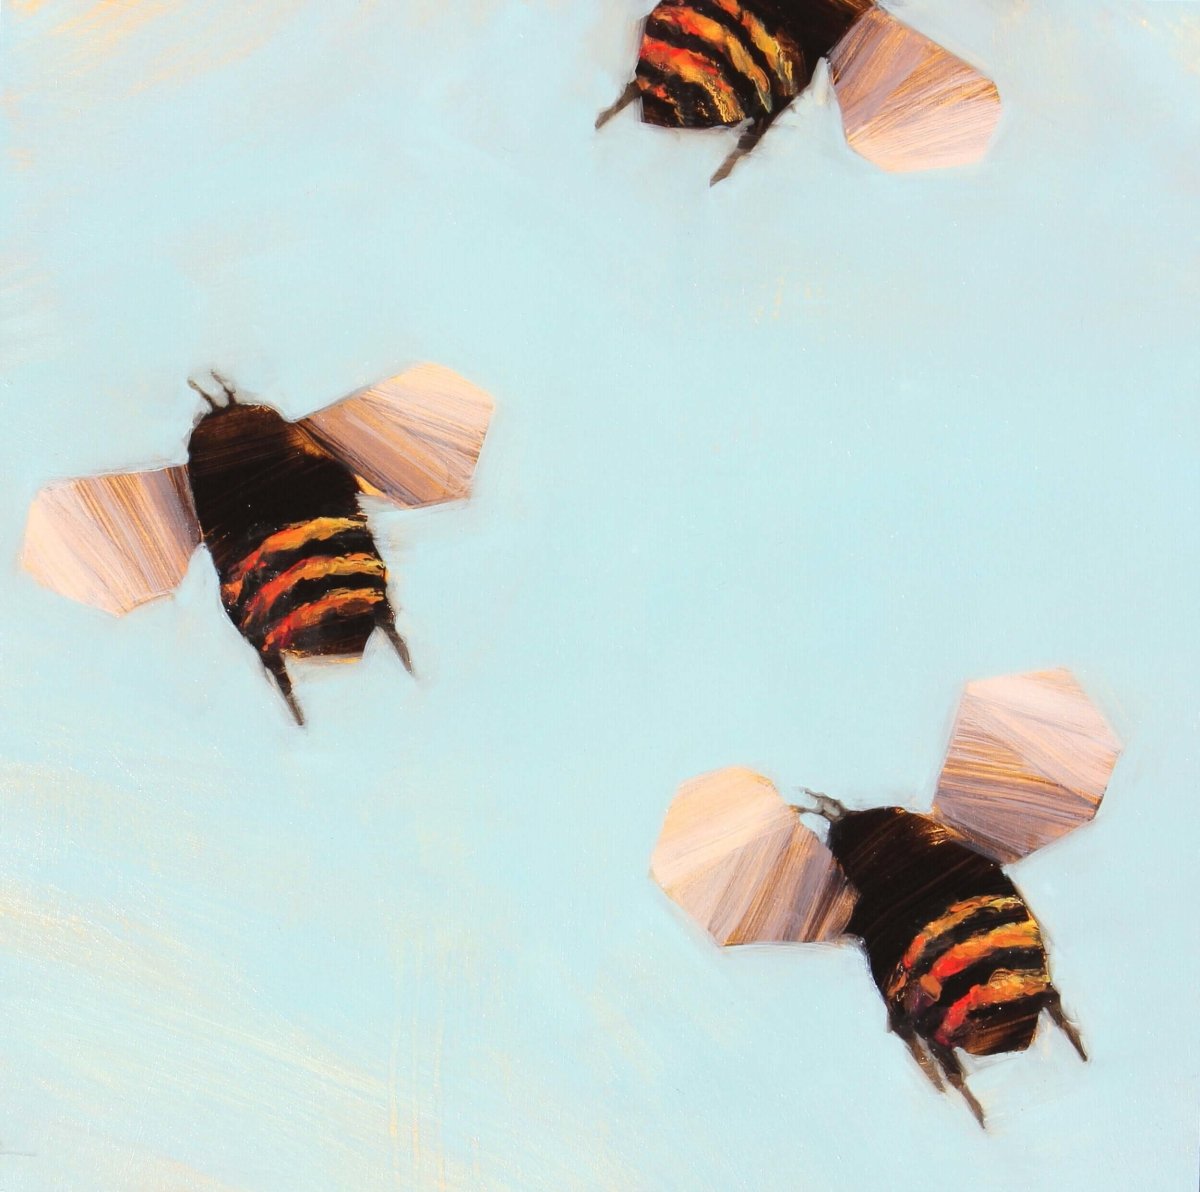 Bees 2-08 by Angie Renfro at LePrince Galleries